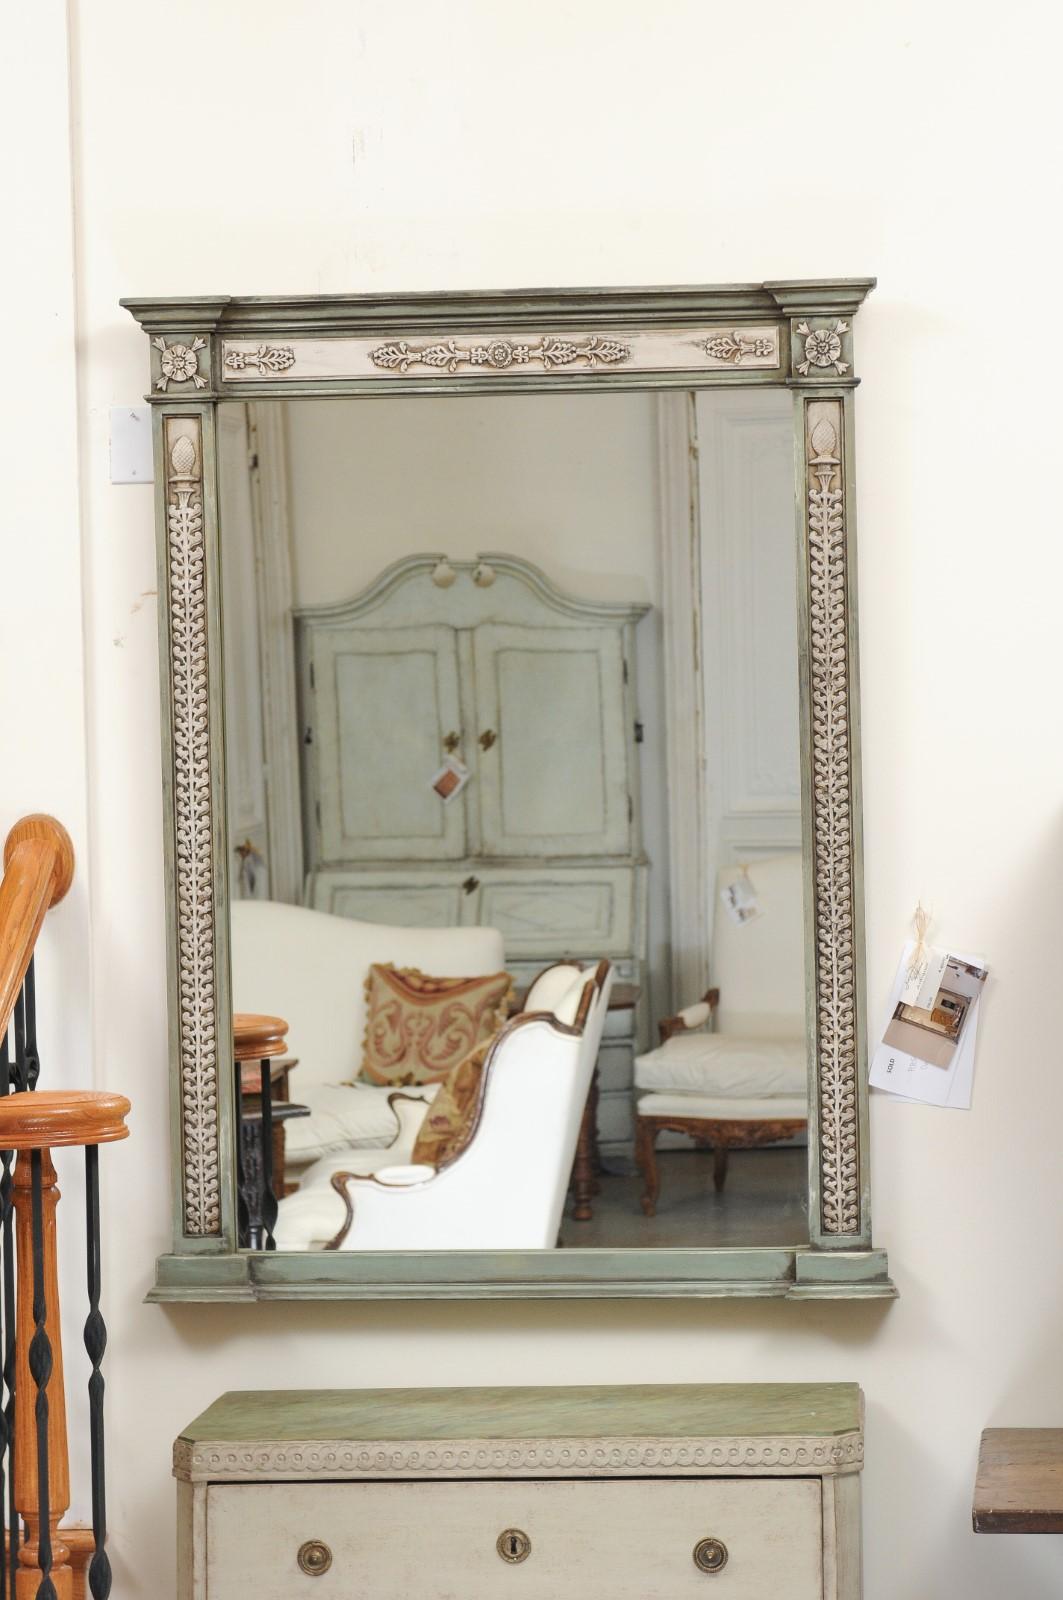 A tall painted wood mirror made from mid-18th century French door frames with carved motifs, priced and sold separately. This mirror features an exquisite linear frame, made from French 1750s doors. This general linearity reminds us of the new